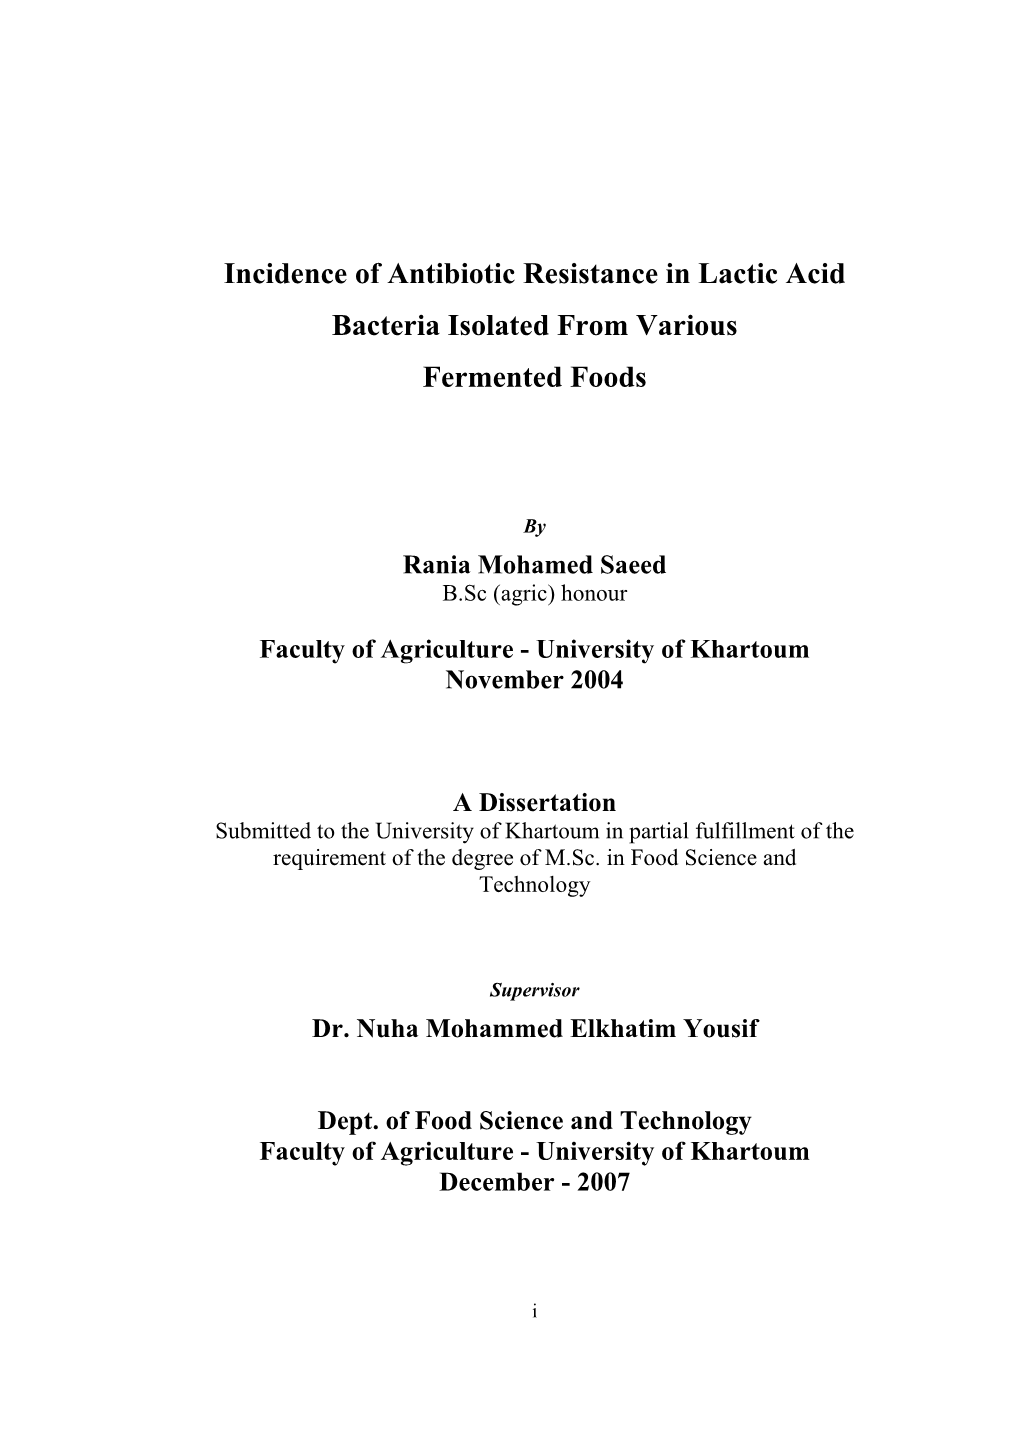 Incidence of Antibiotic Resistance in Lactic Acid Bacteria Isolated from Various Fermented Foods